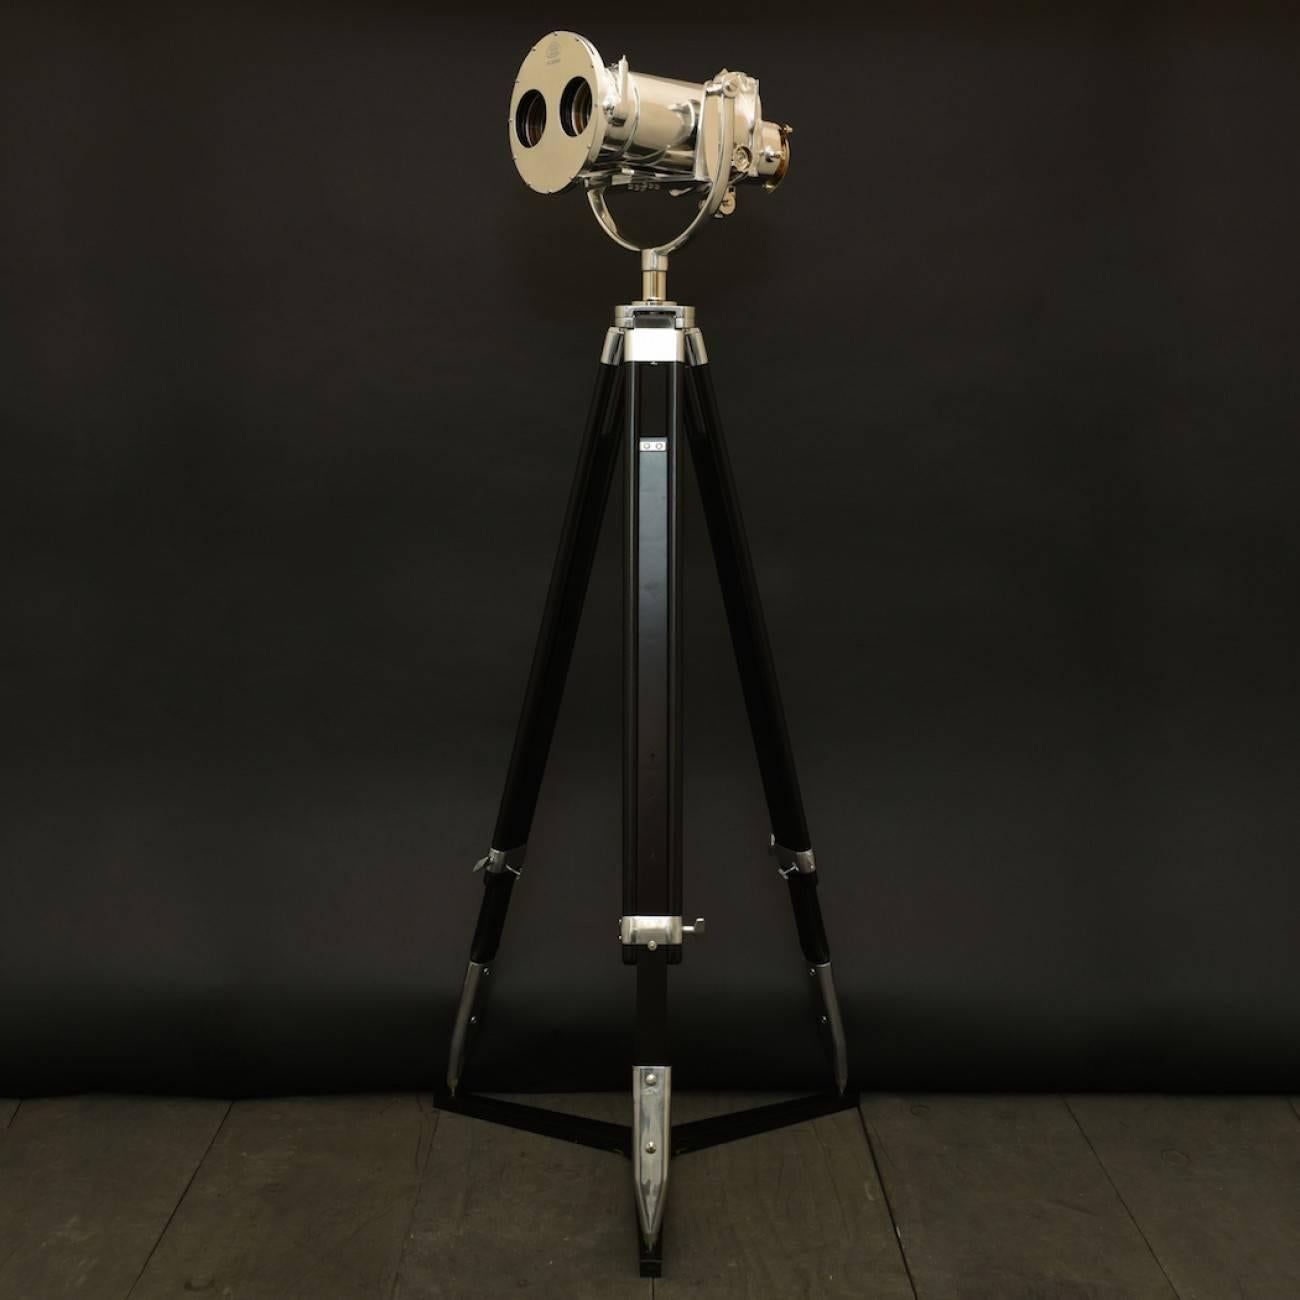 A splendid naval binocular gunsight with 10 power magnification and 70mm lenses by Ross of London, circa 1940. Has integrated mechanism with three different filters to enhance the image in different light conditions and external dark filters that